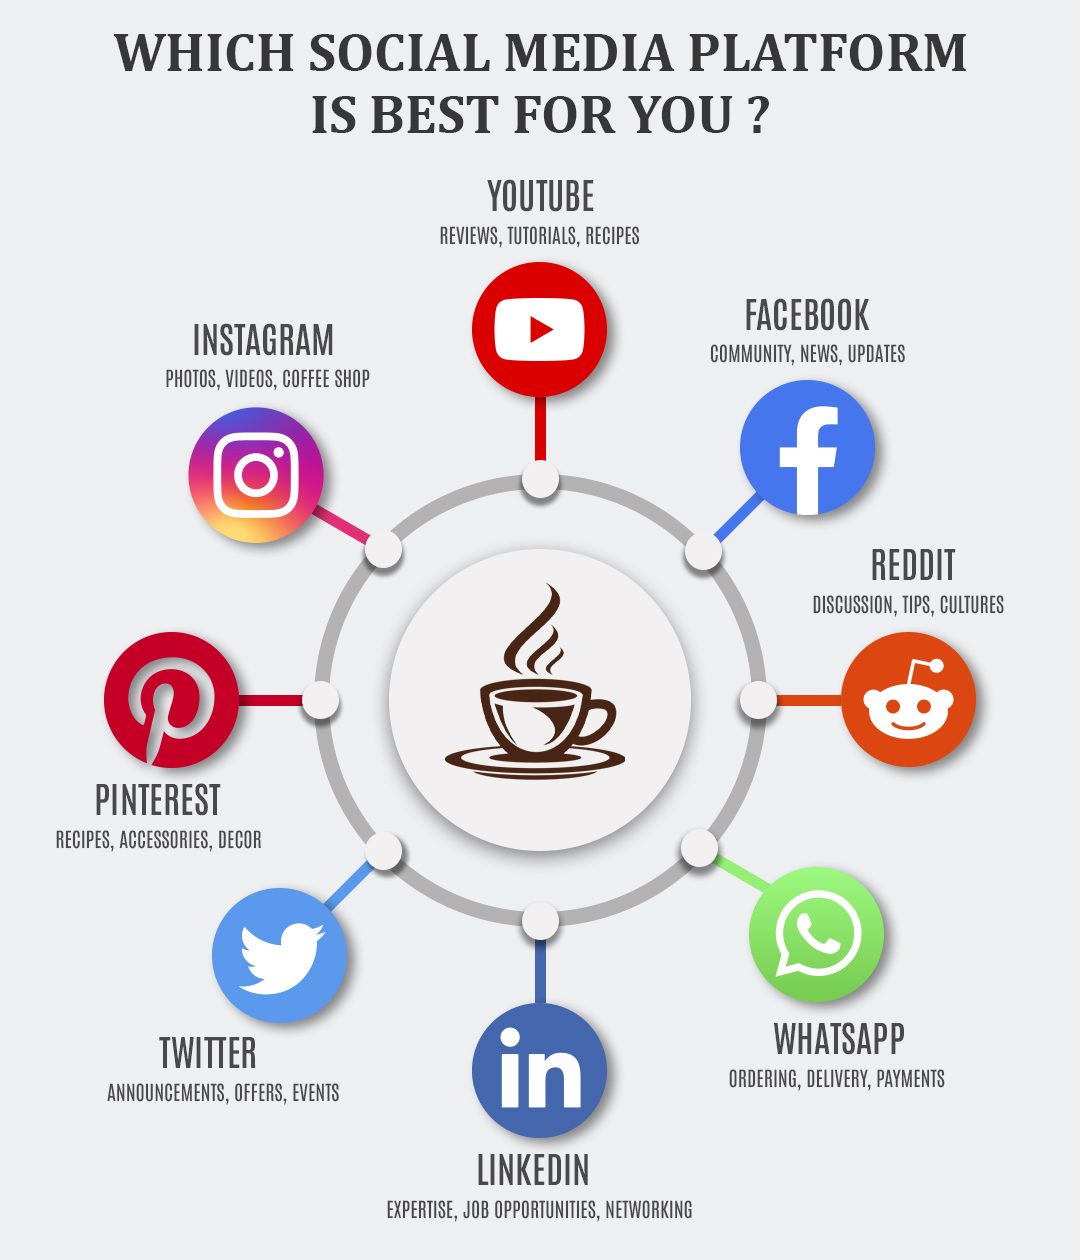 Which Social Media Platform is best for you?